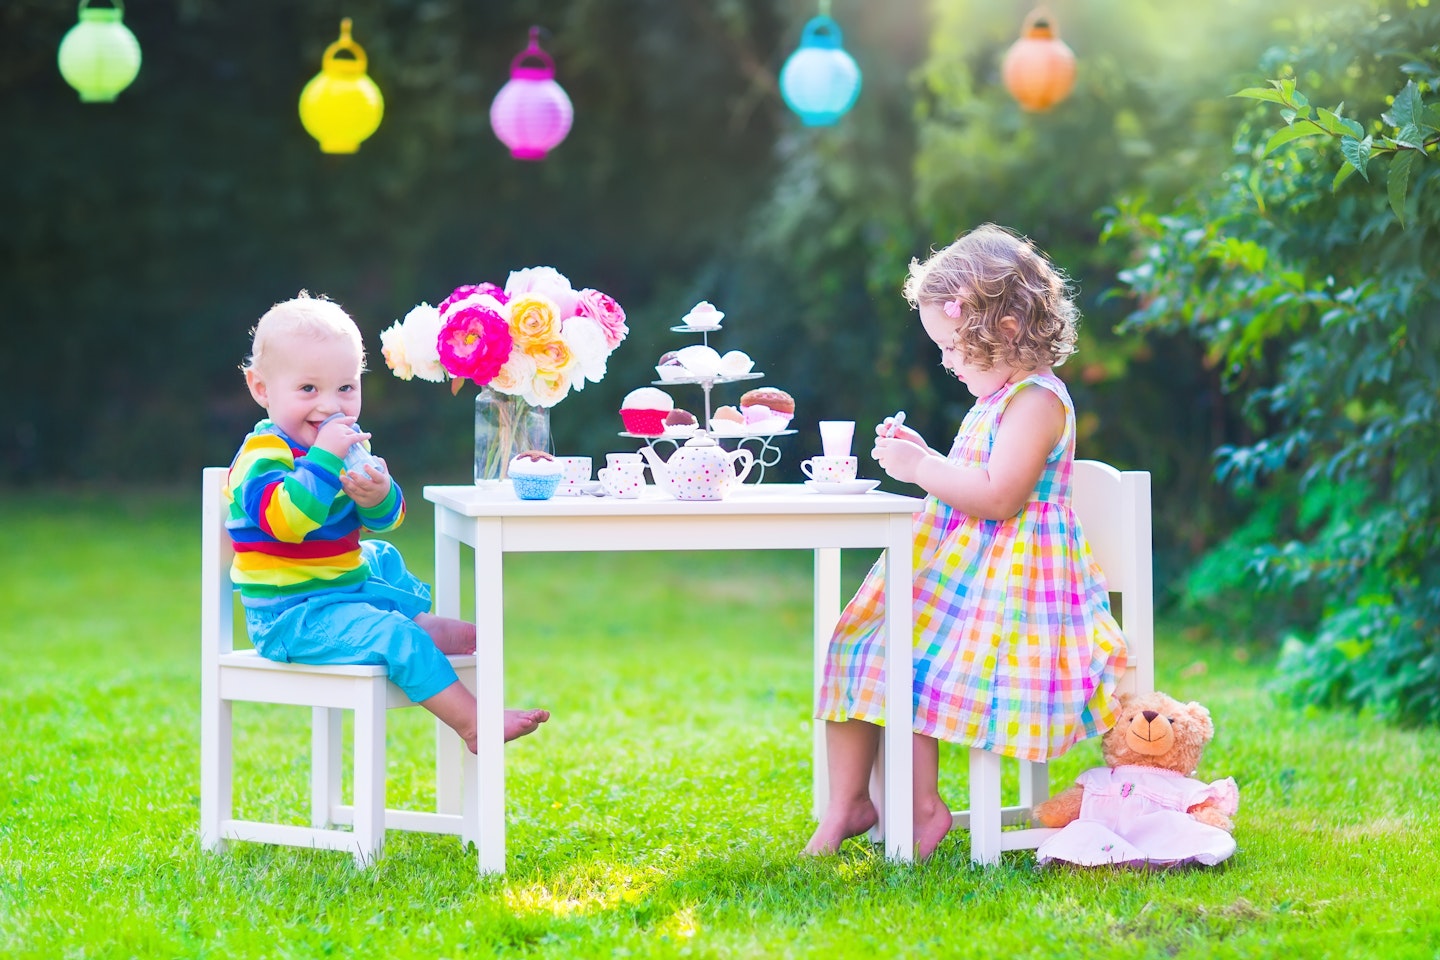 How to throw an afternoon tea party that your tot will love